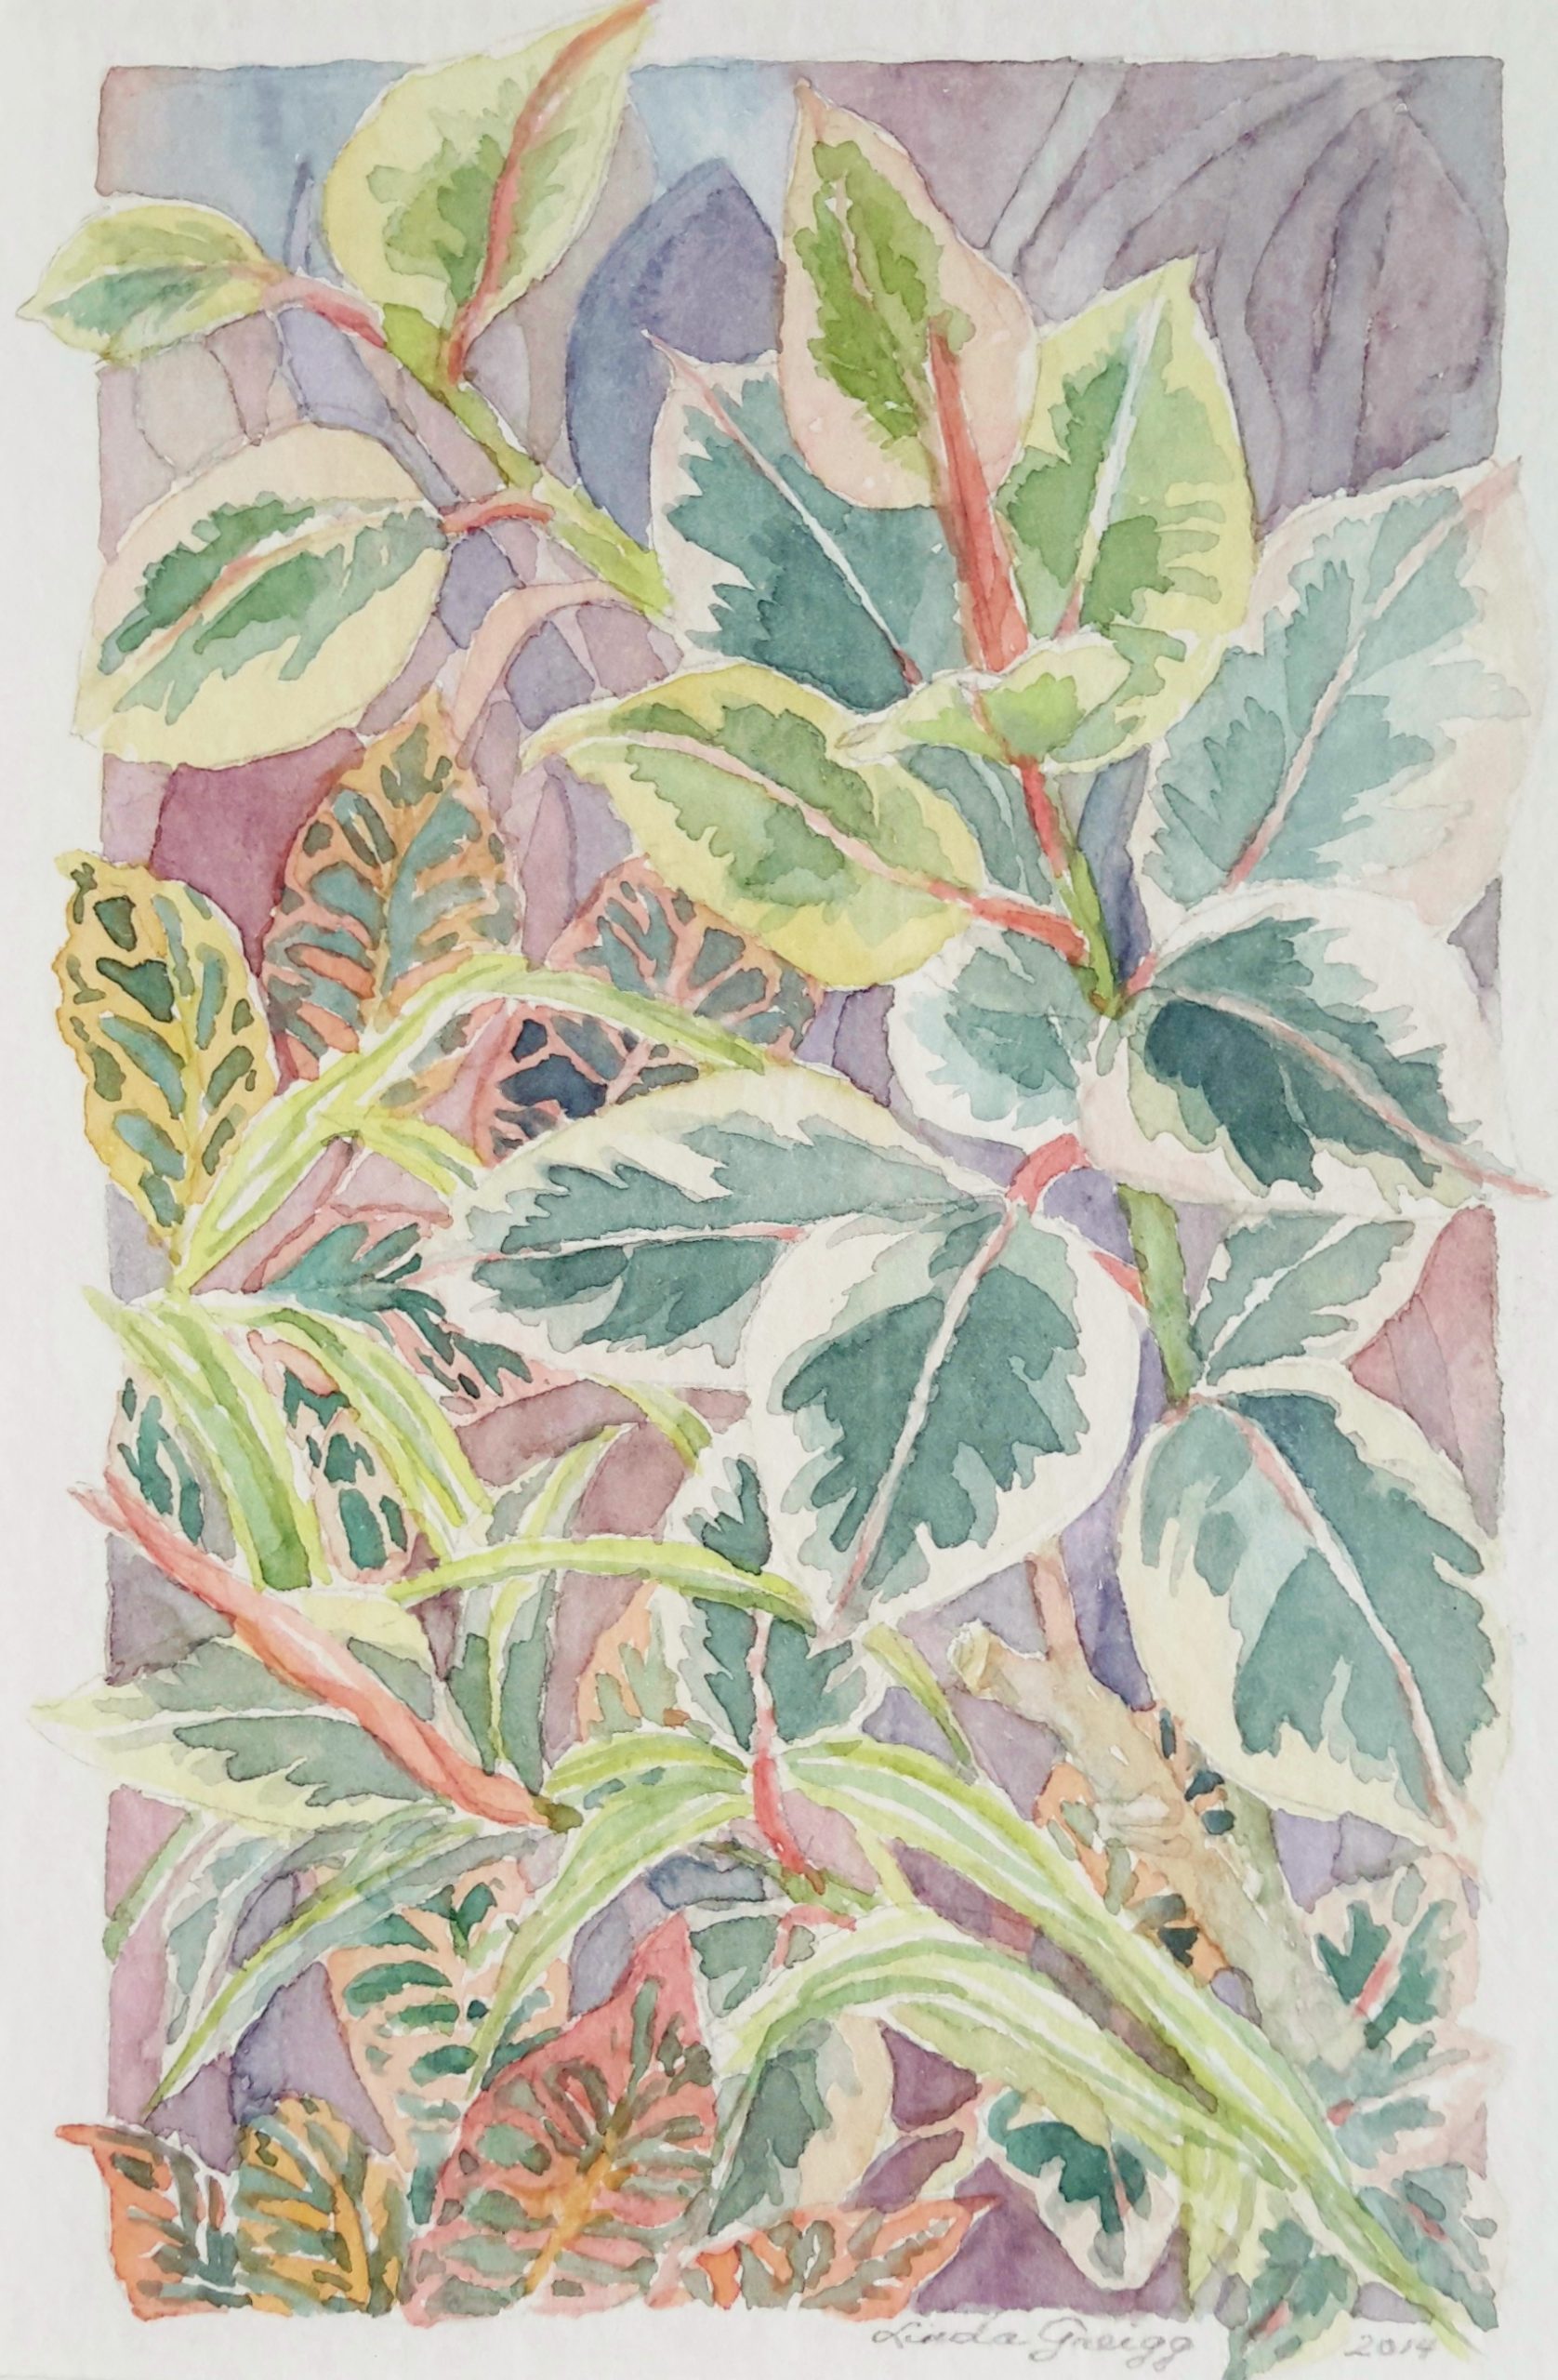 Patterned Leaves by Linda Greigg $225, watercolor painting